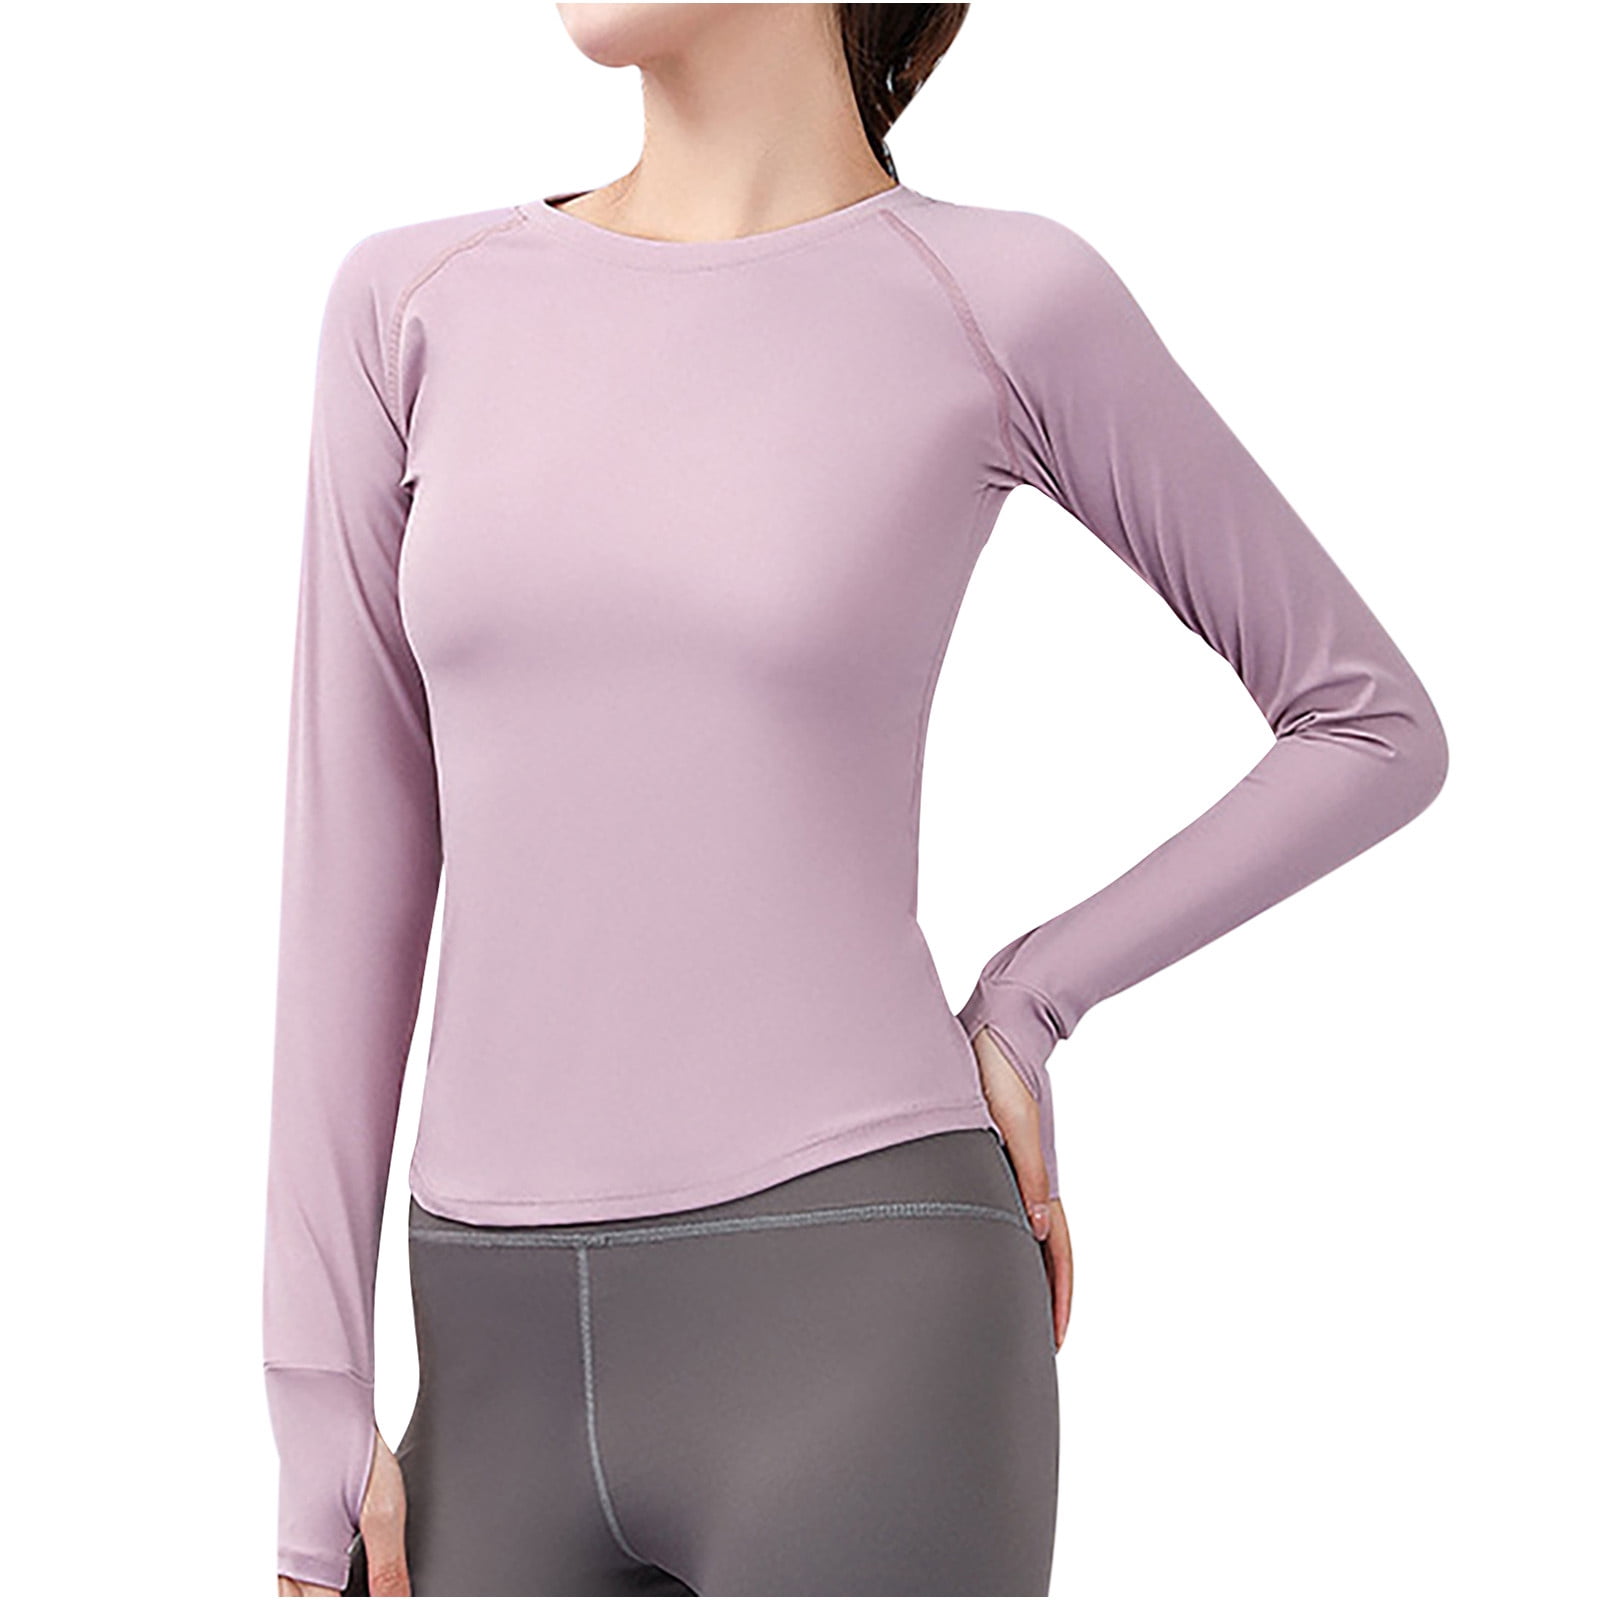 Stretch Long Sleeve Yoga Shirts Workout Activewear Tops Stretch  Quick-Drying Athletic Sports Thumbhole TShirts Blouse for Women Mesh Hollow  Gym Fitness 